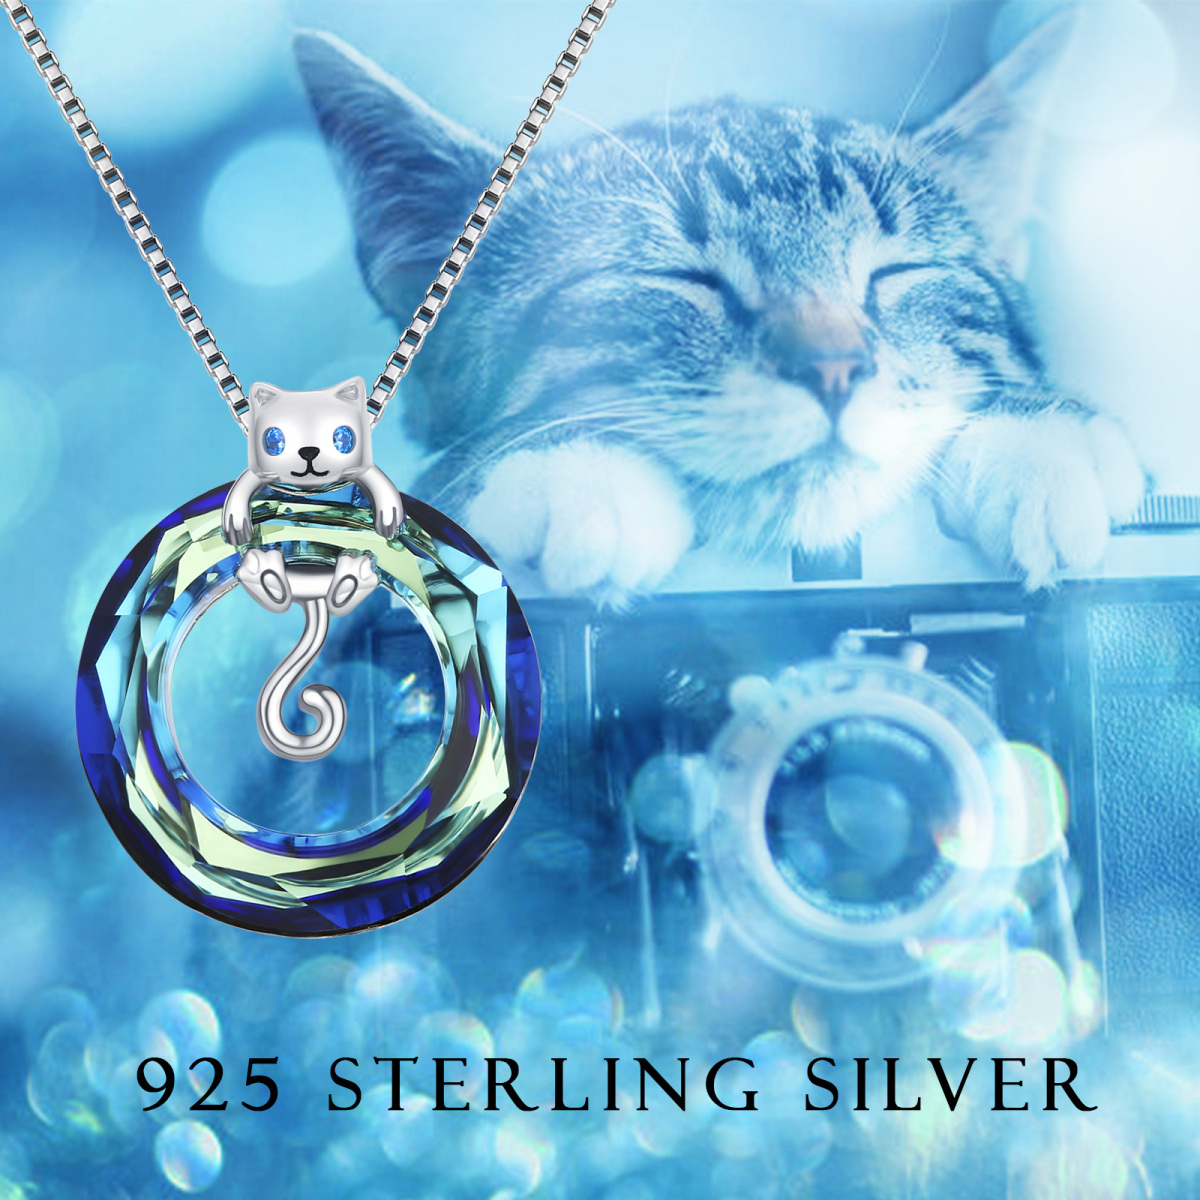 Sterling Silver Hanging Cat Crystal Pendant Necklace with Box Chain-5